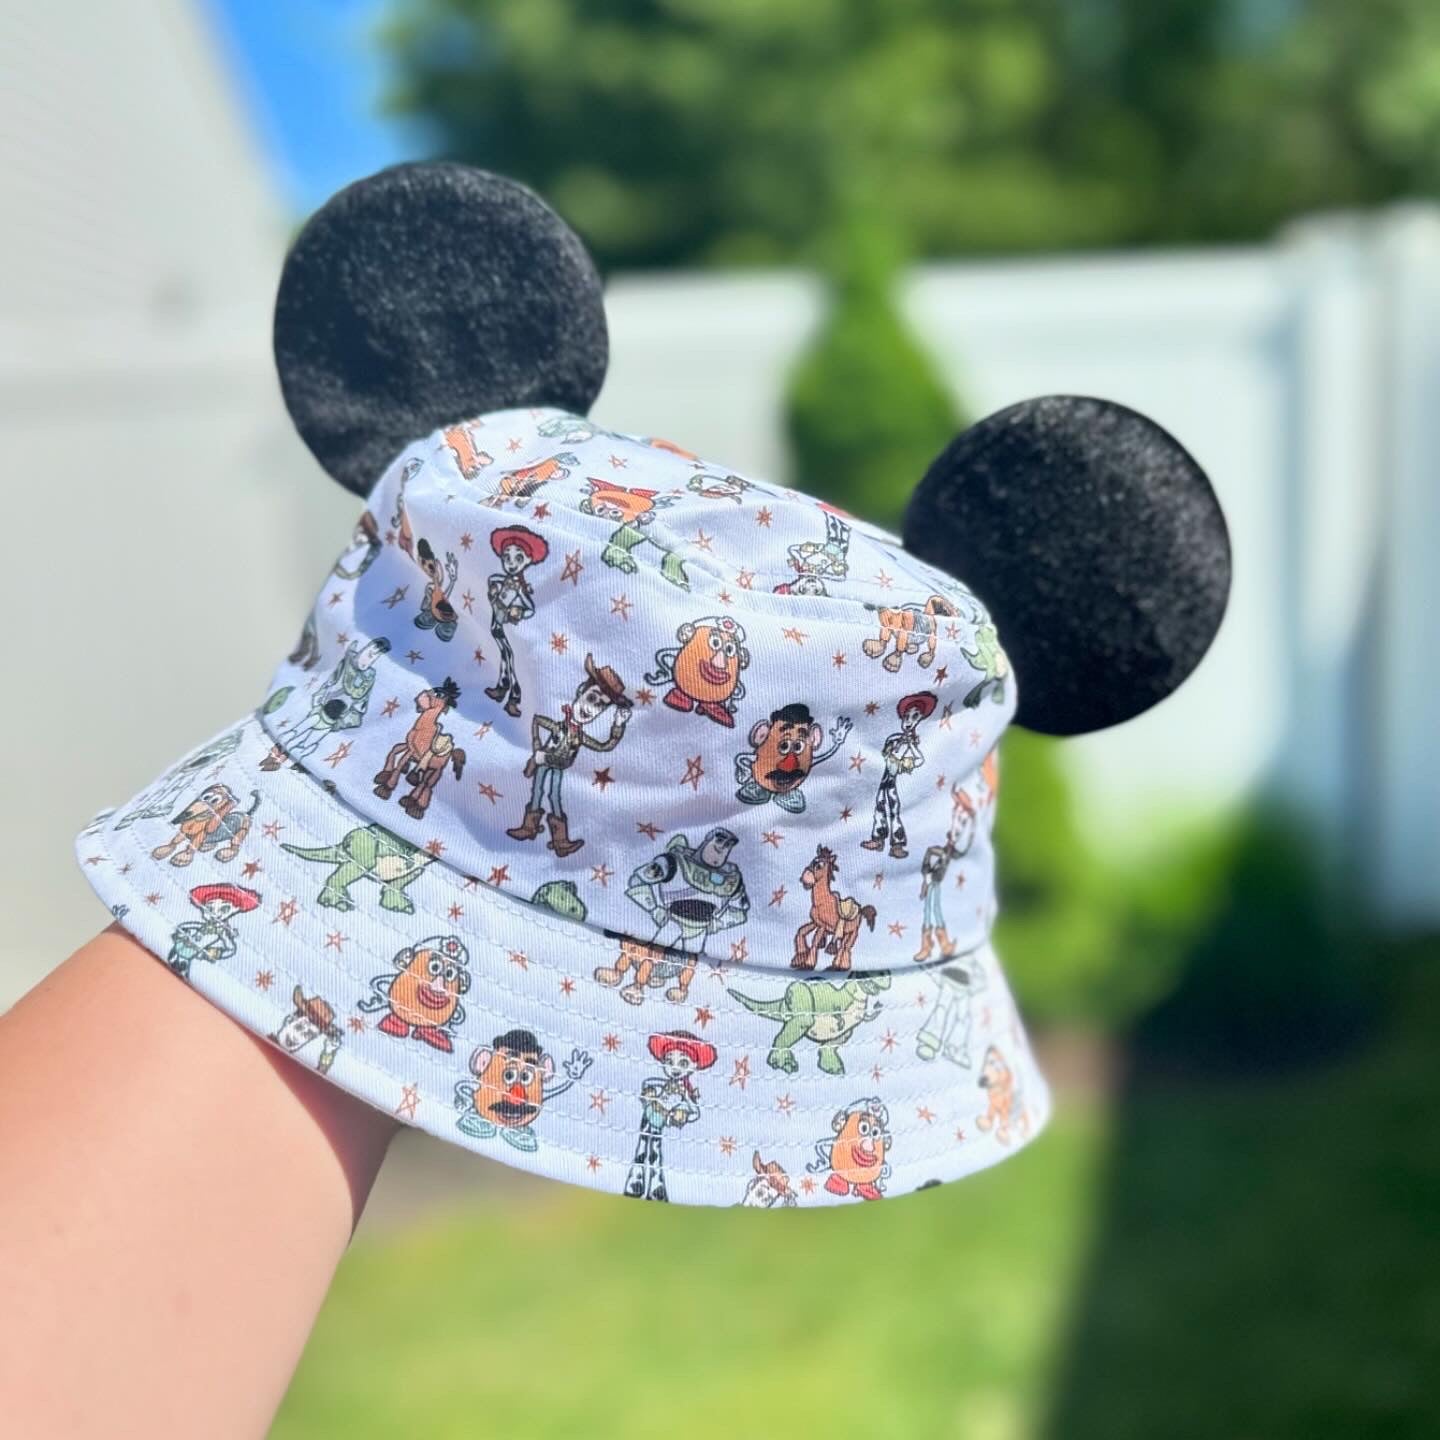 Toddler Hats